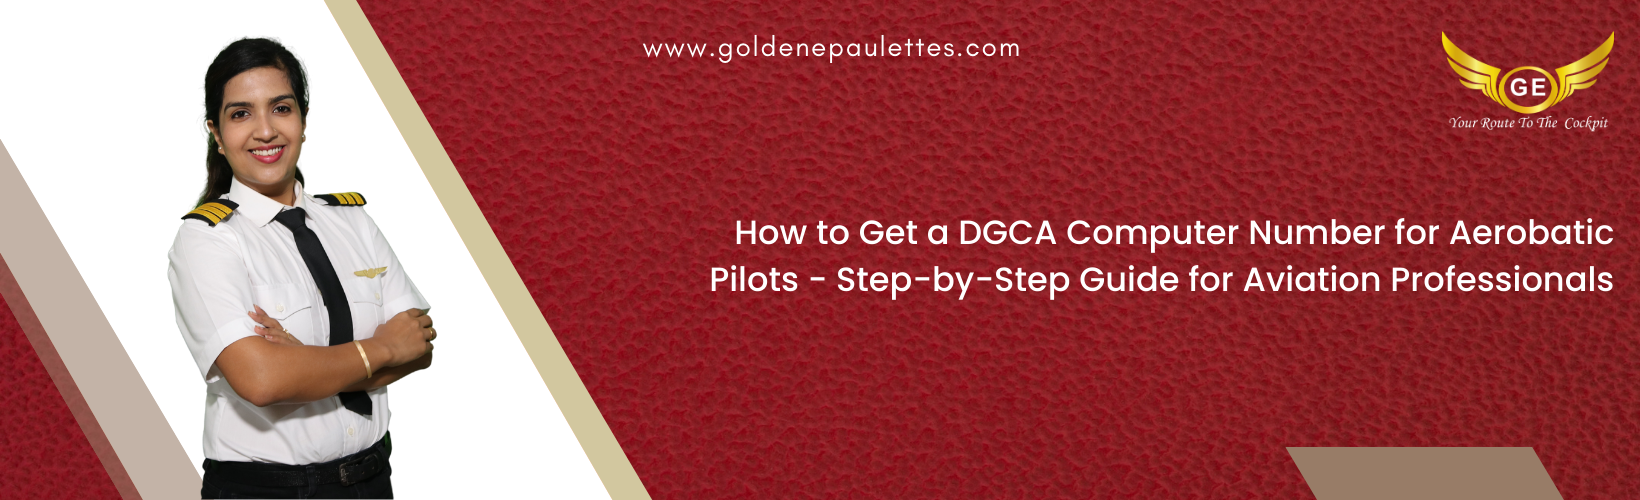 How to Obtain a DGCA Computer Number for Aerobatic Pilots